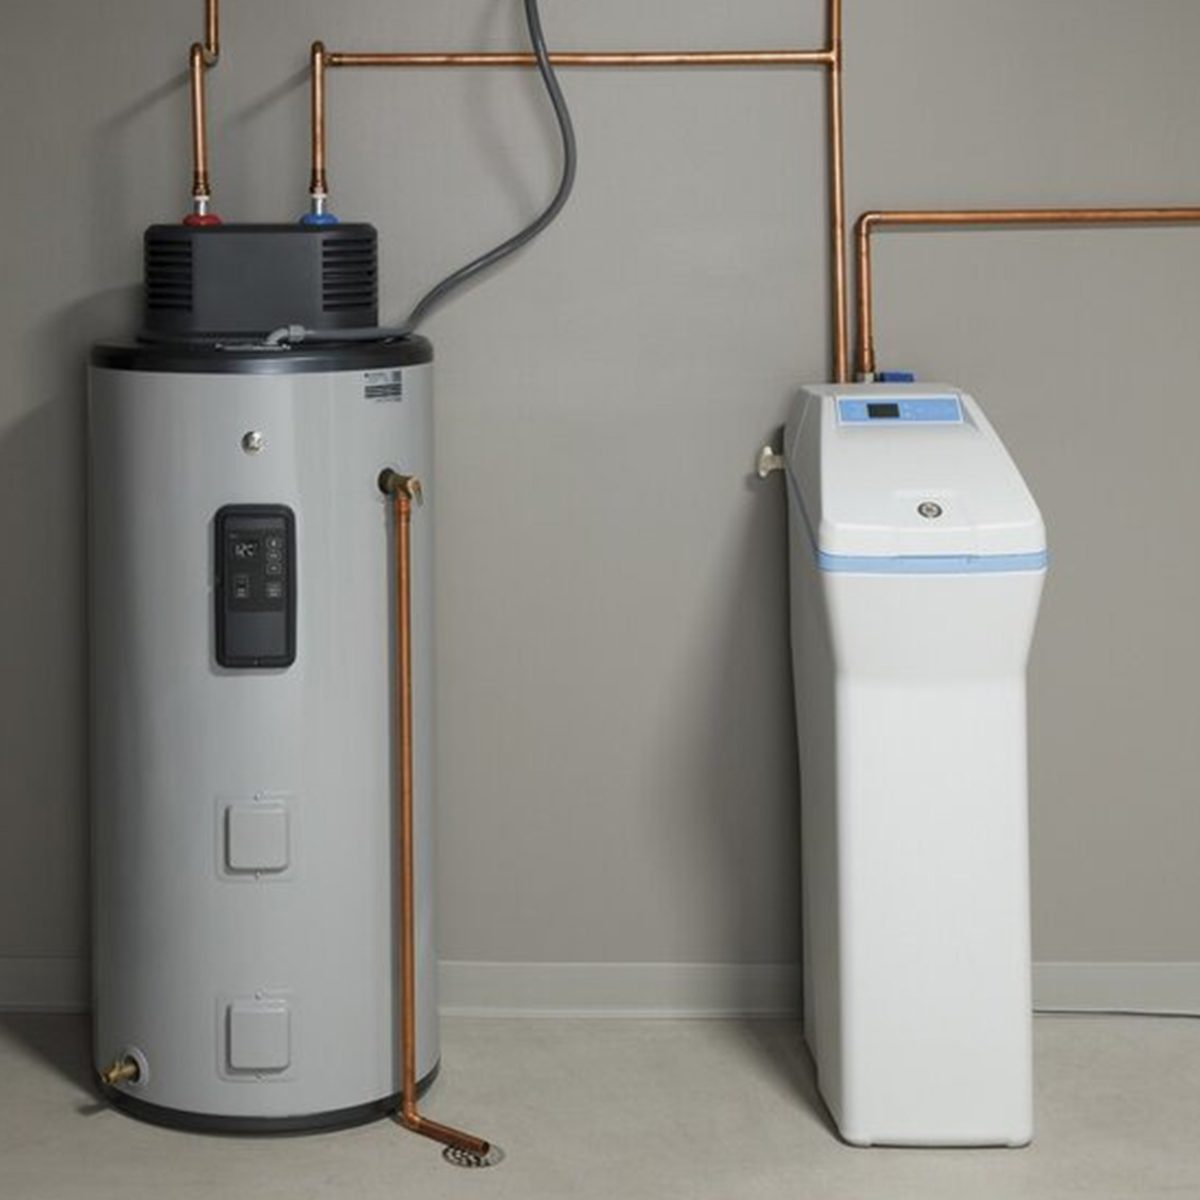 Reliance Electric Water Heaters, Find the Reliance Electric Water Heater  that Meets Your Needs